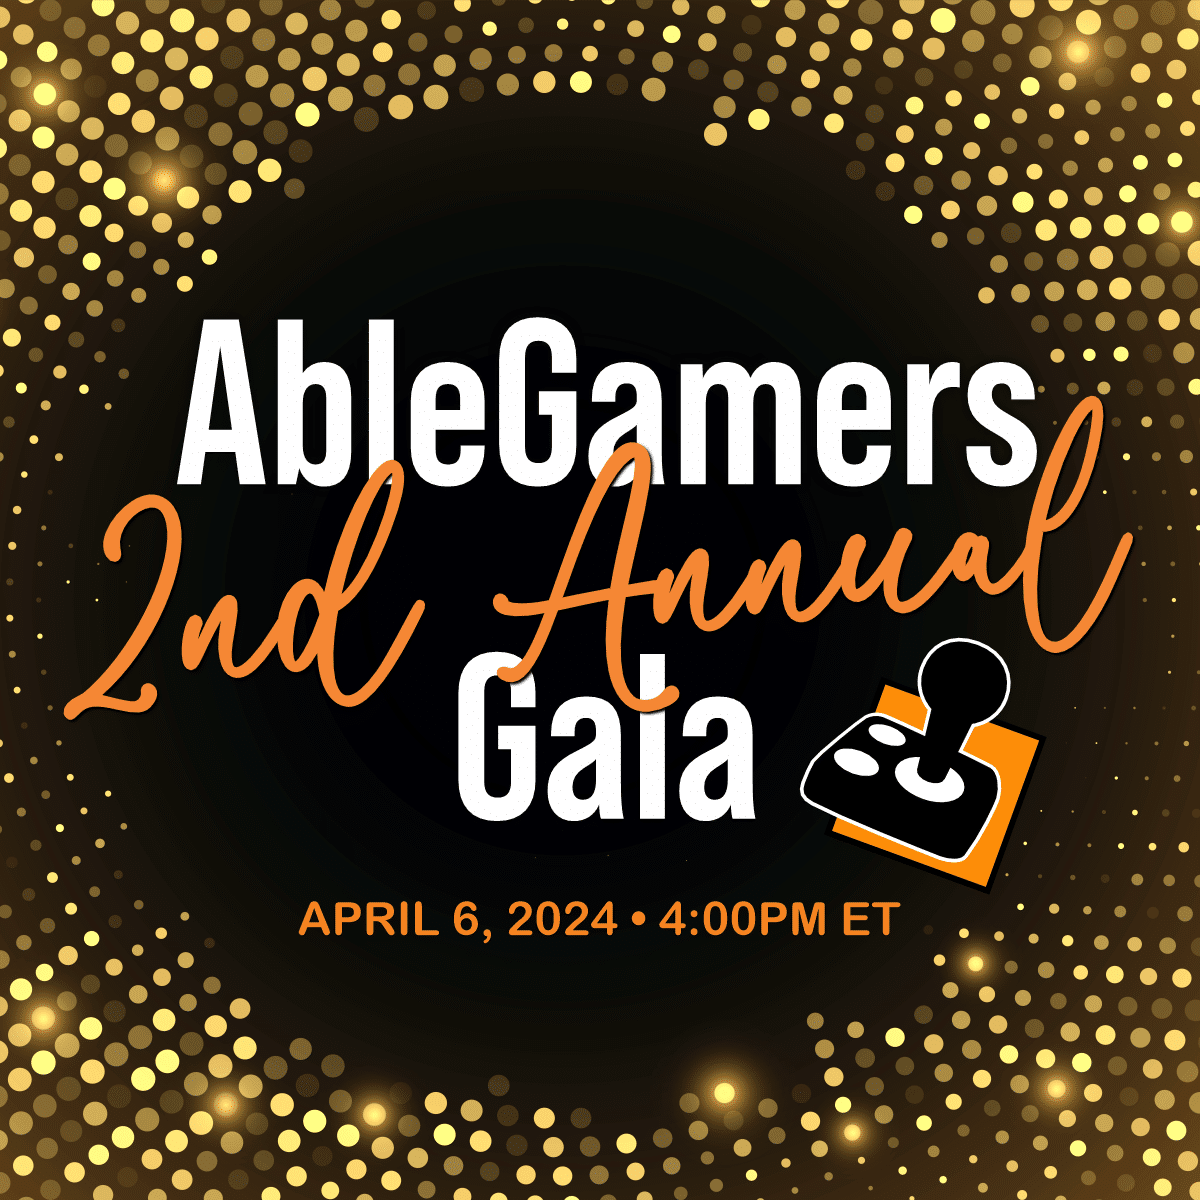 A glitter gold background with text that says 'AbleGamers 2nd Annual Gala April 6, 2024 at 4:00 PM ET'